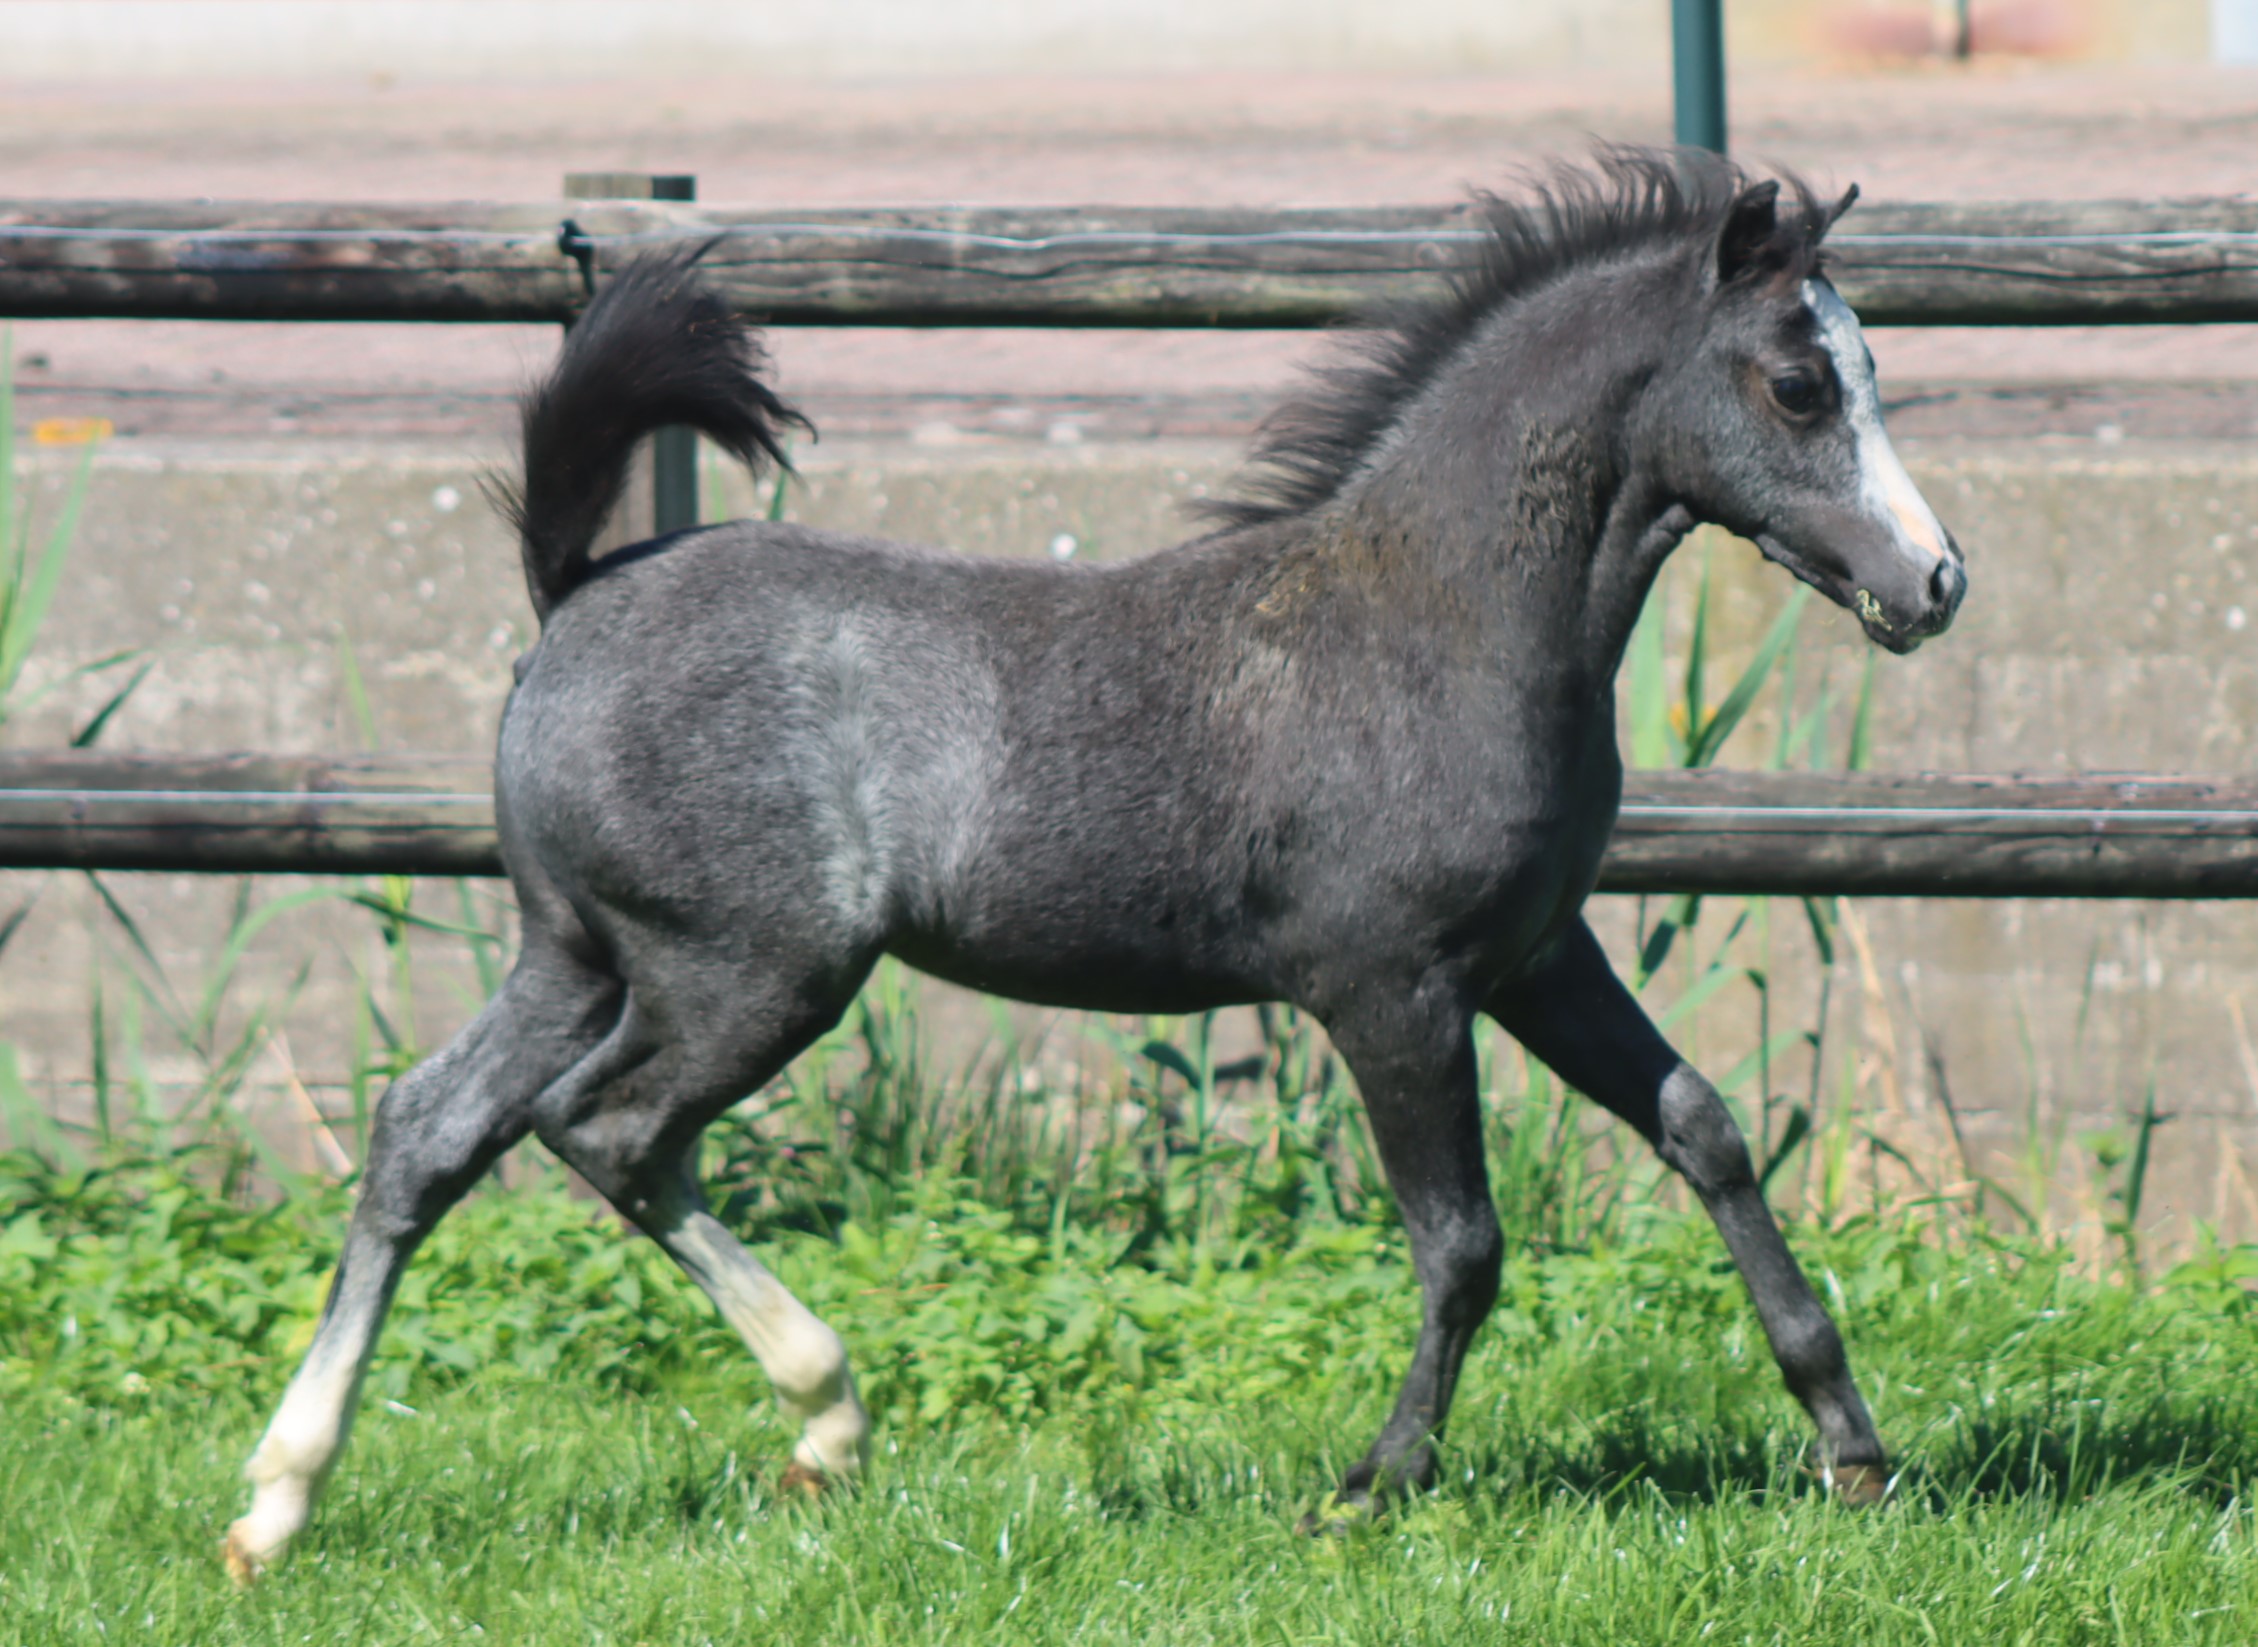 Quality section A filly foal out of the finest Synod bloodlines/Kwaliteitsvol merrieveulen uit de beste Synod bloedlijnen